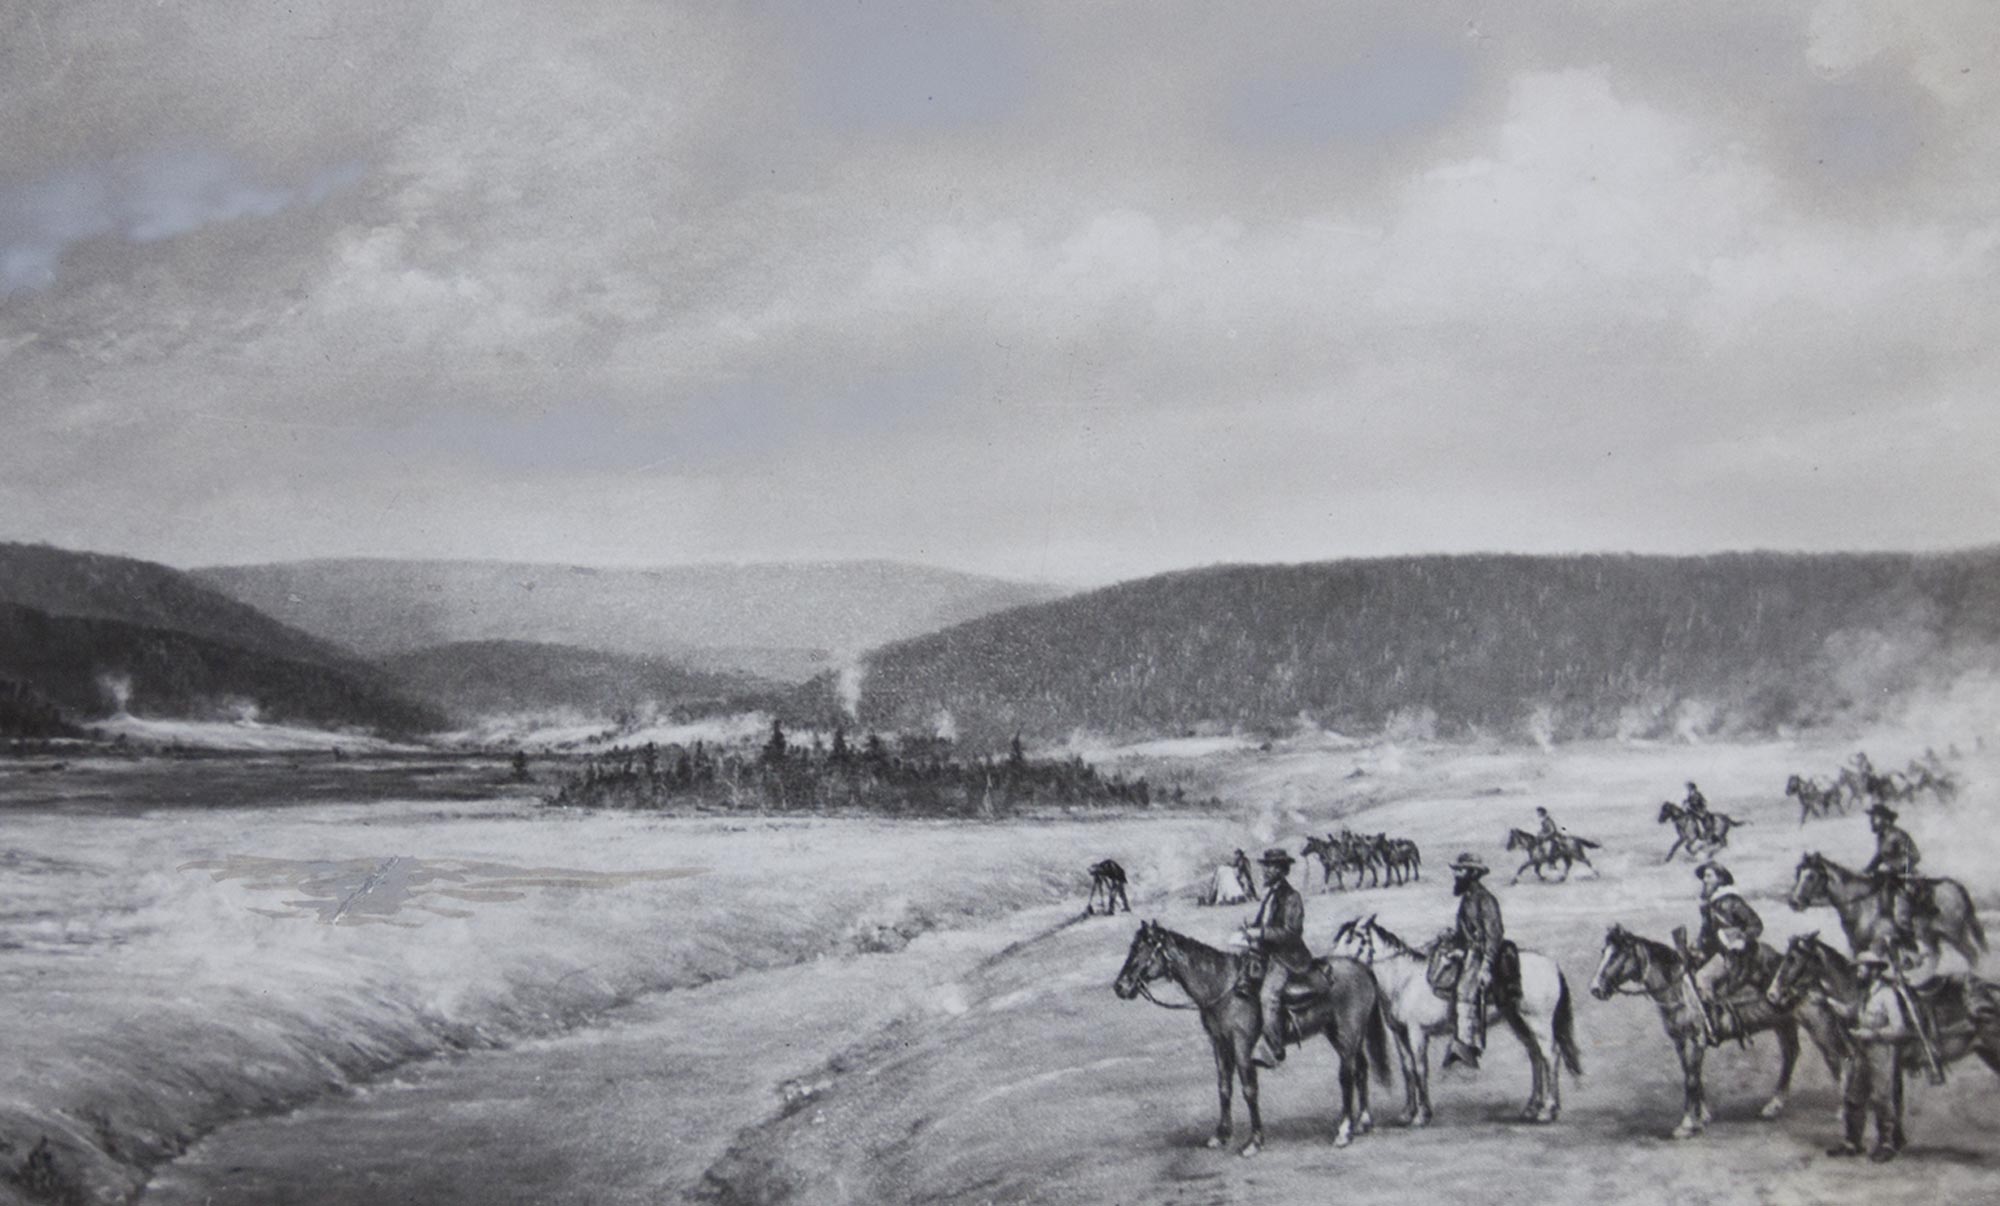 homas Moran (second from right on horseback, foreground) and William Henry Jackson (standing, middle ground) with Old Faithful in eruption in the background